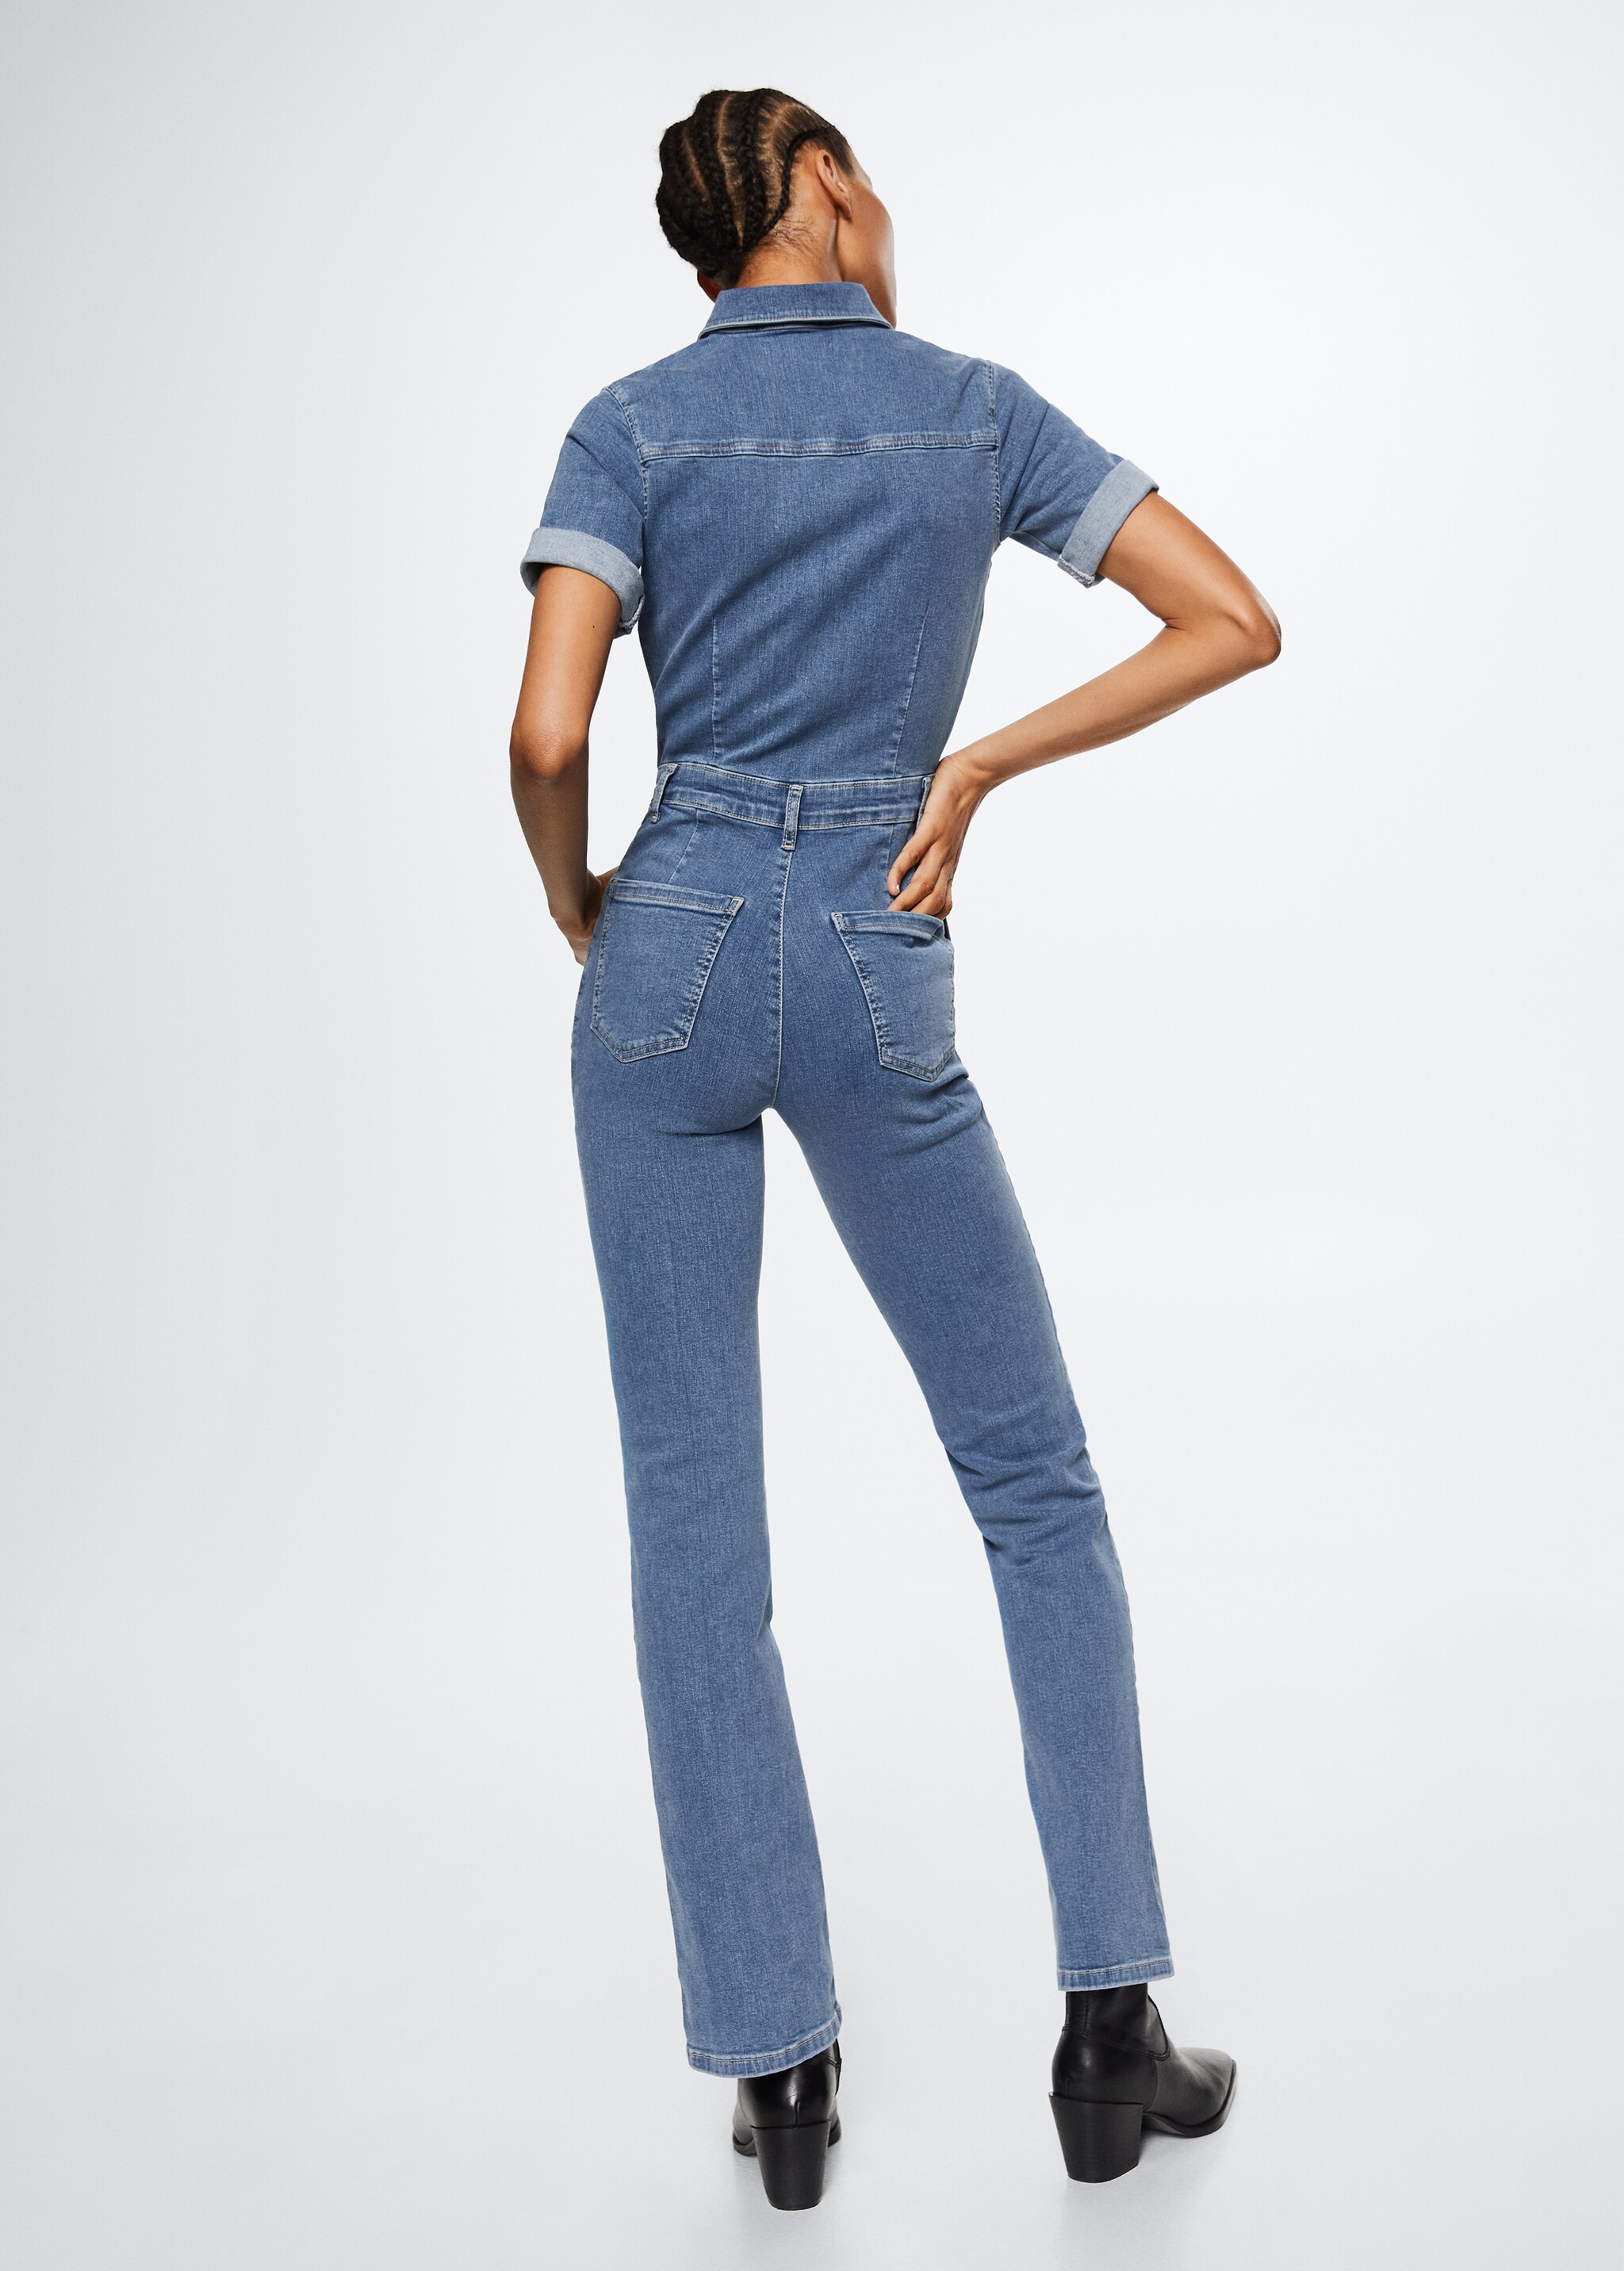 Denim jumpsuit with zipper - Reverse of the article